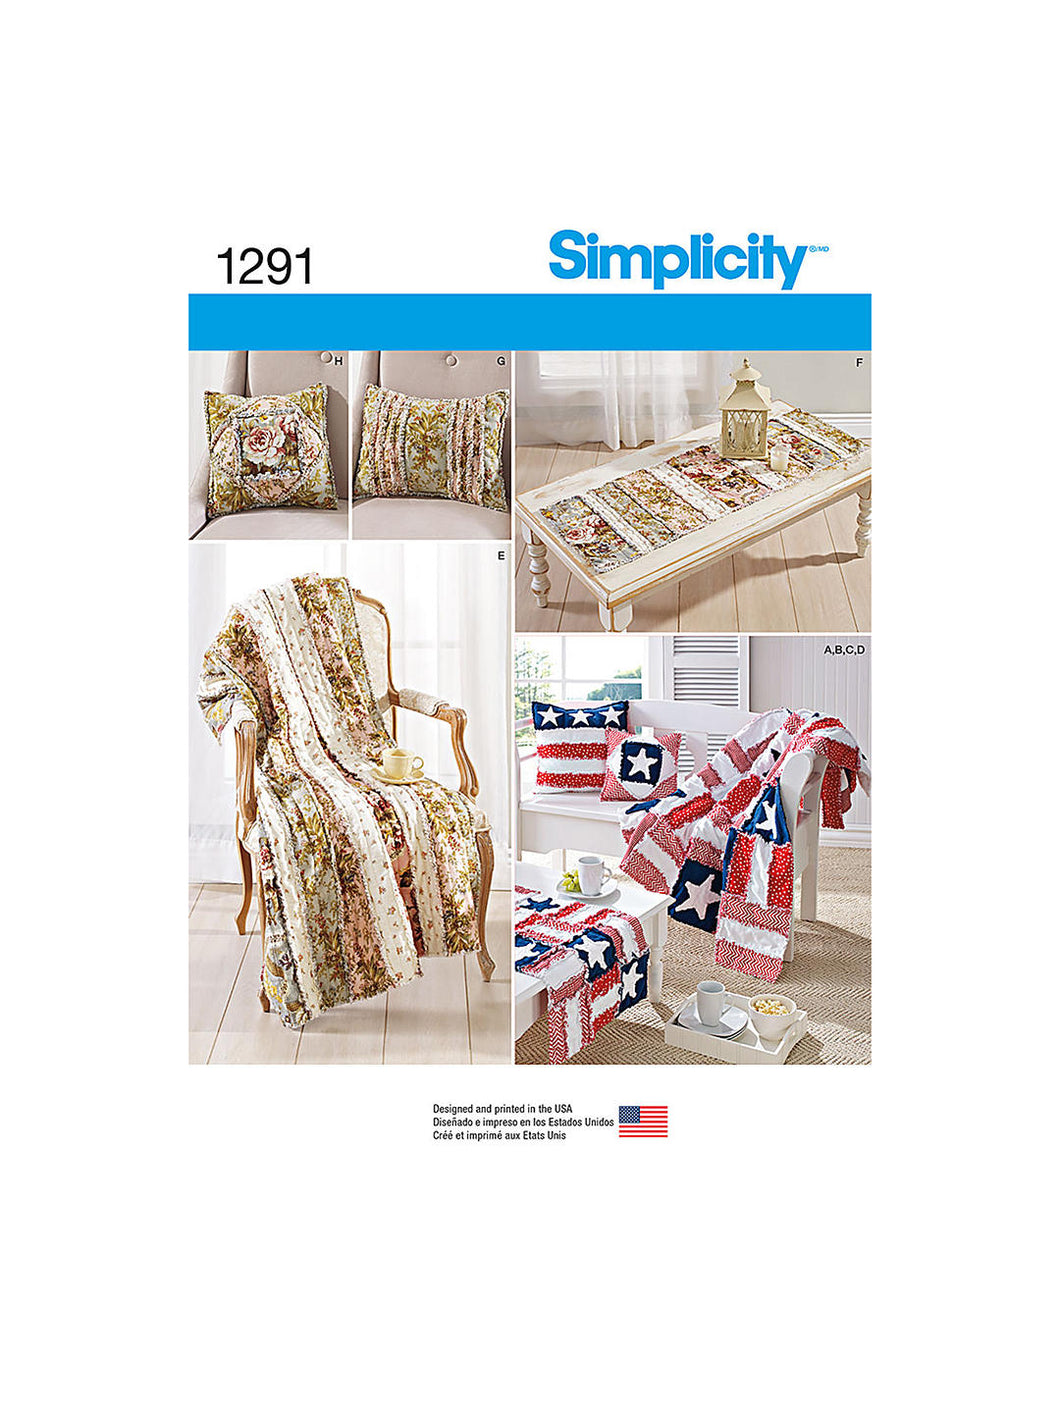 Simplicity 1291 - Rag Quilted Throws and More Sewing Pattern